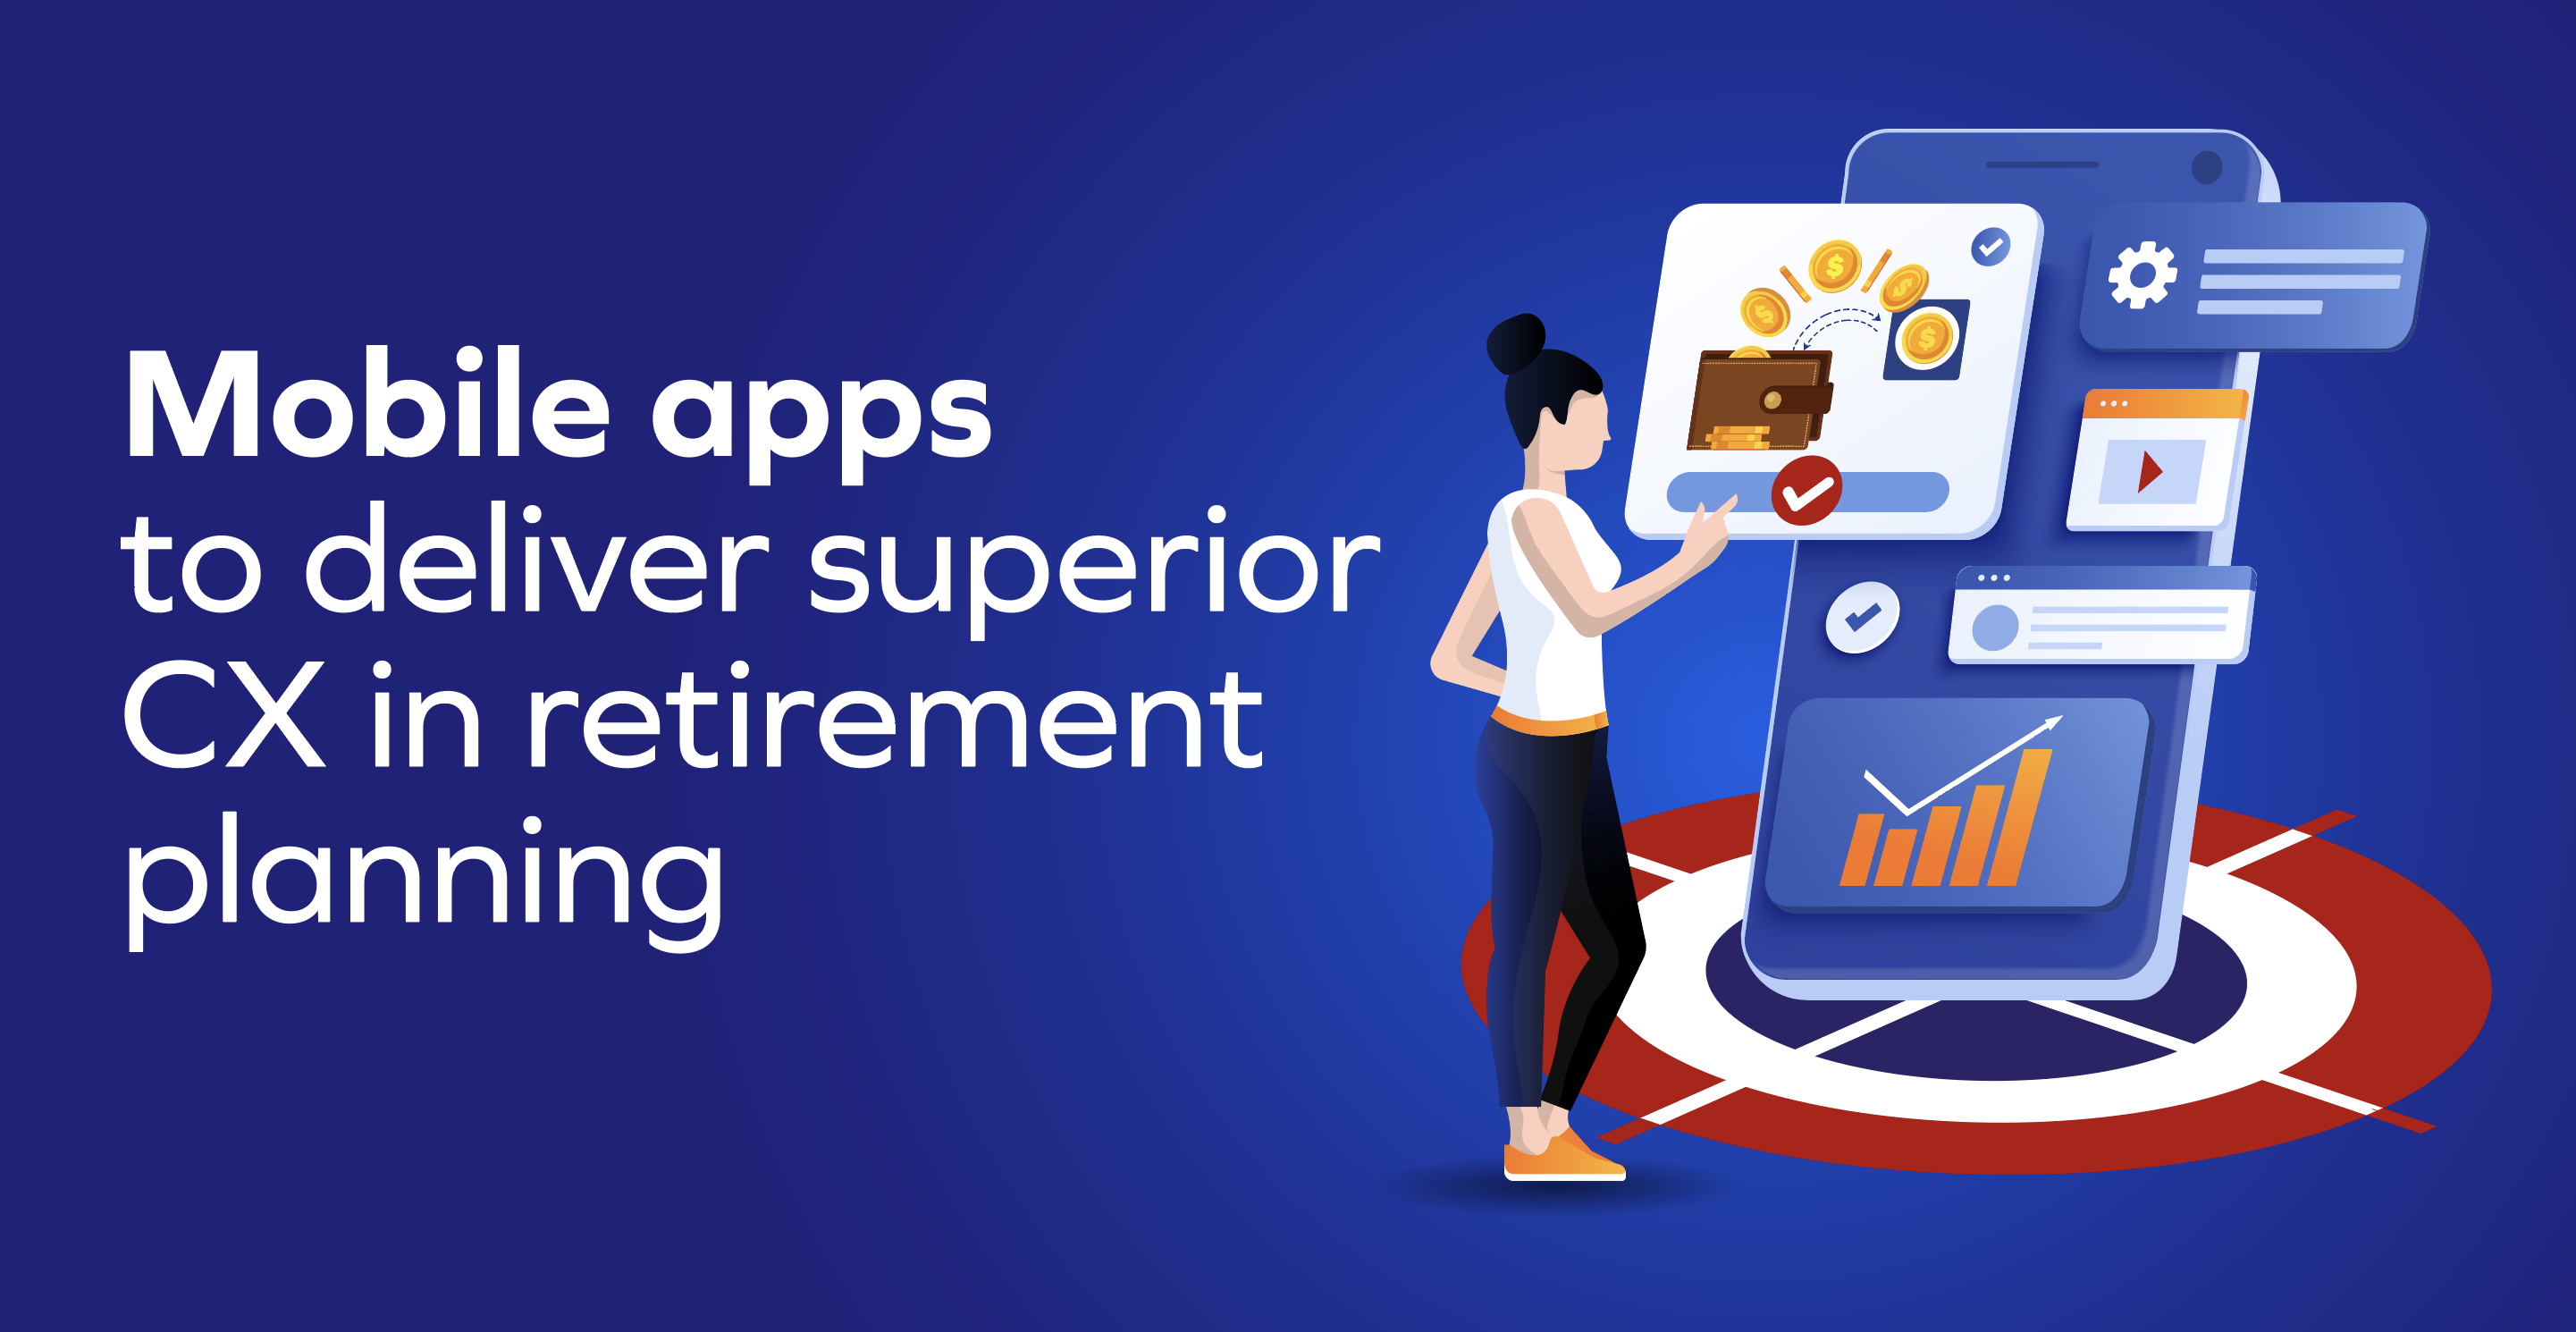 Mobile apps to deliver superior CX in retirement planning